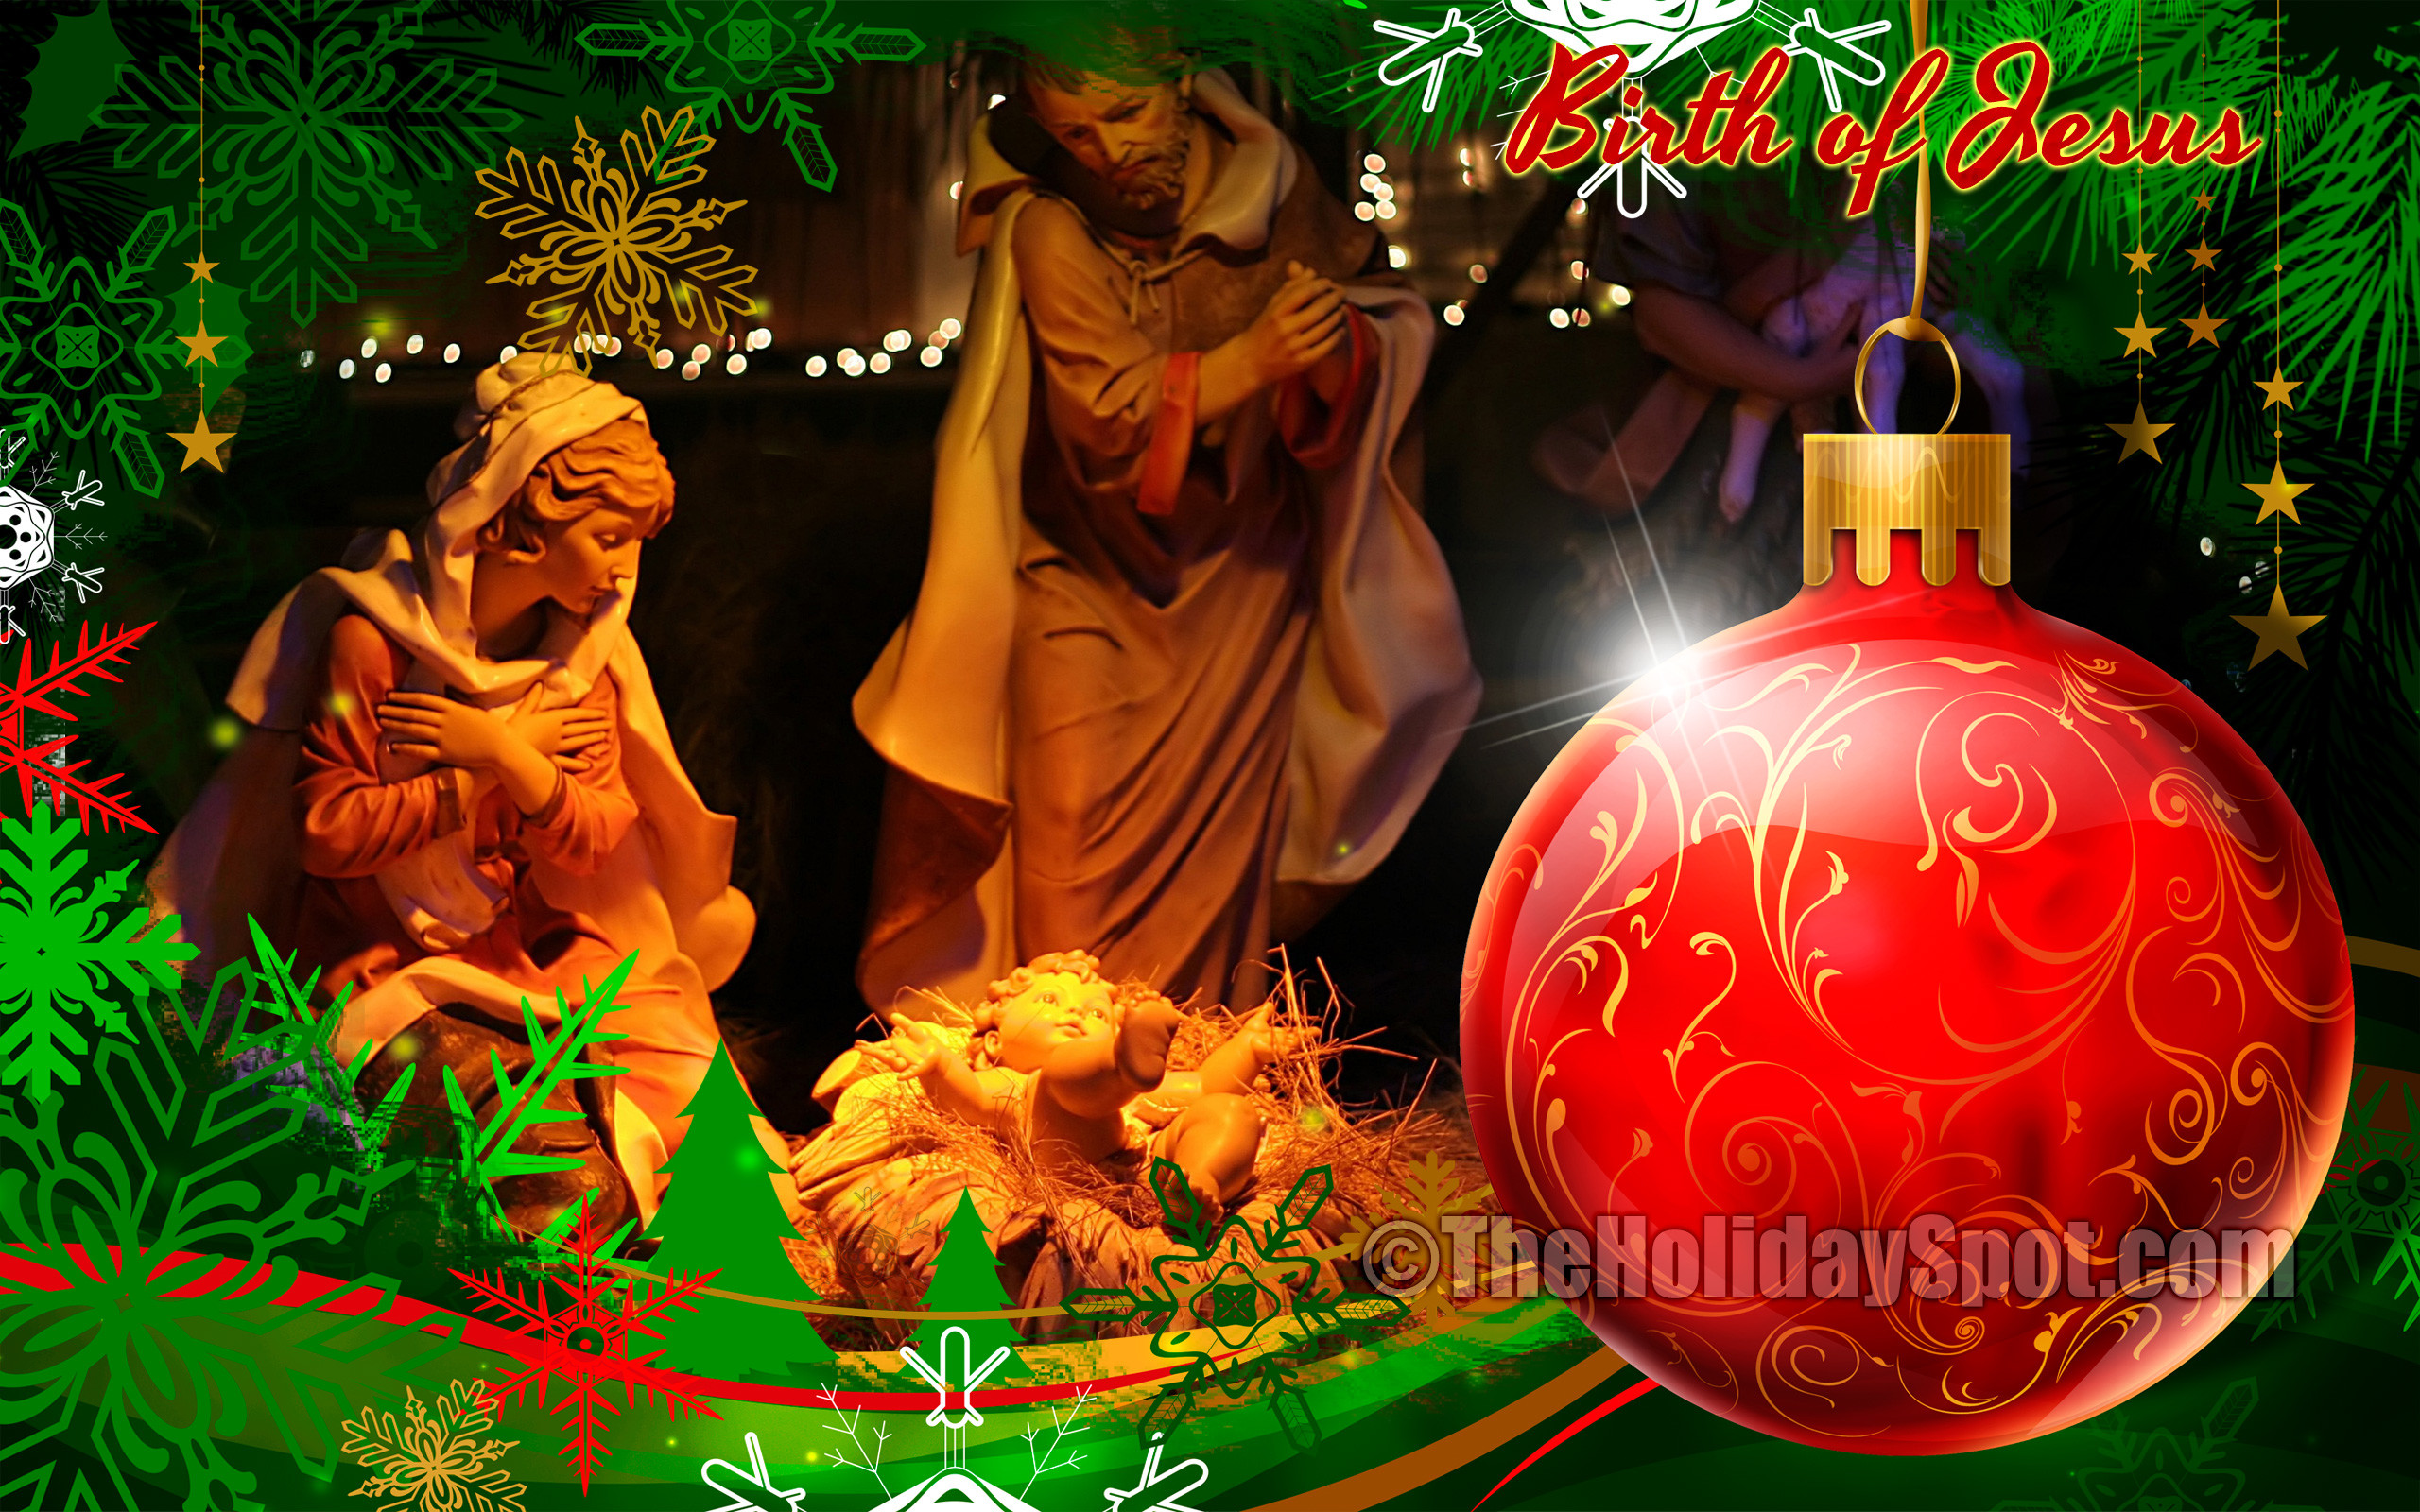 Christmas Wallpaper showing glowing earth during birth of jesus